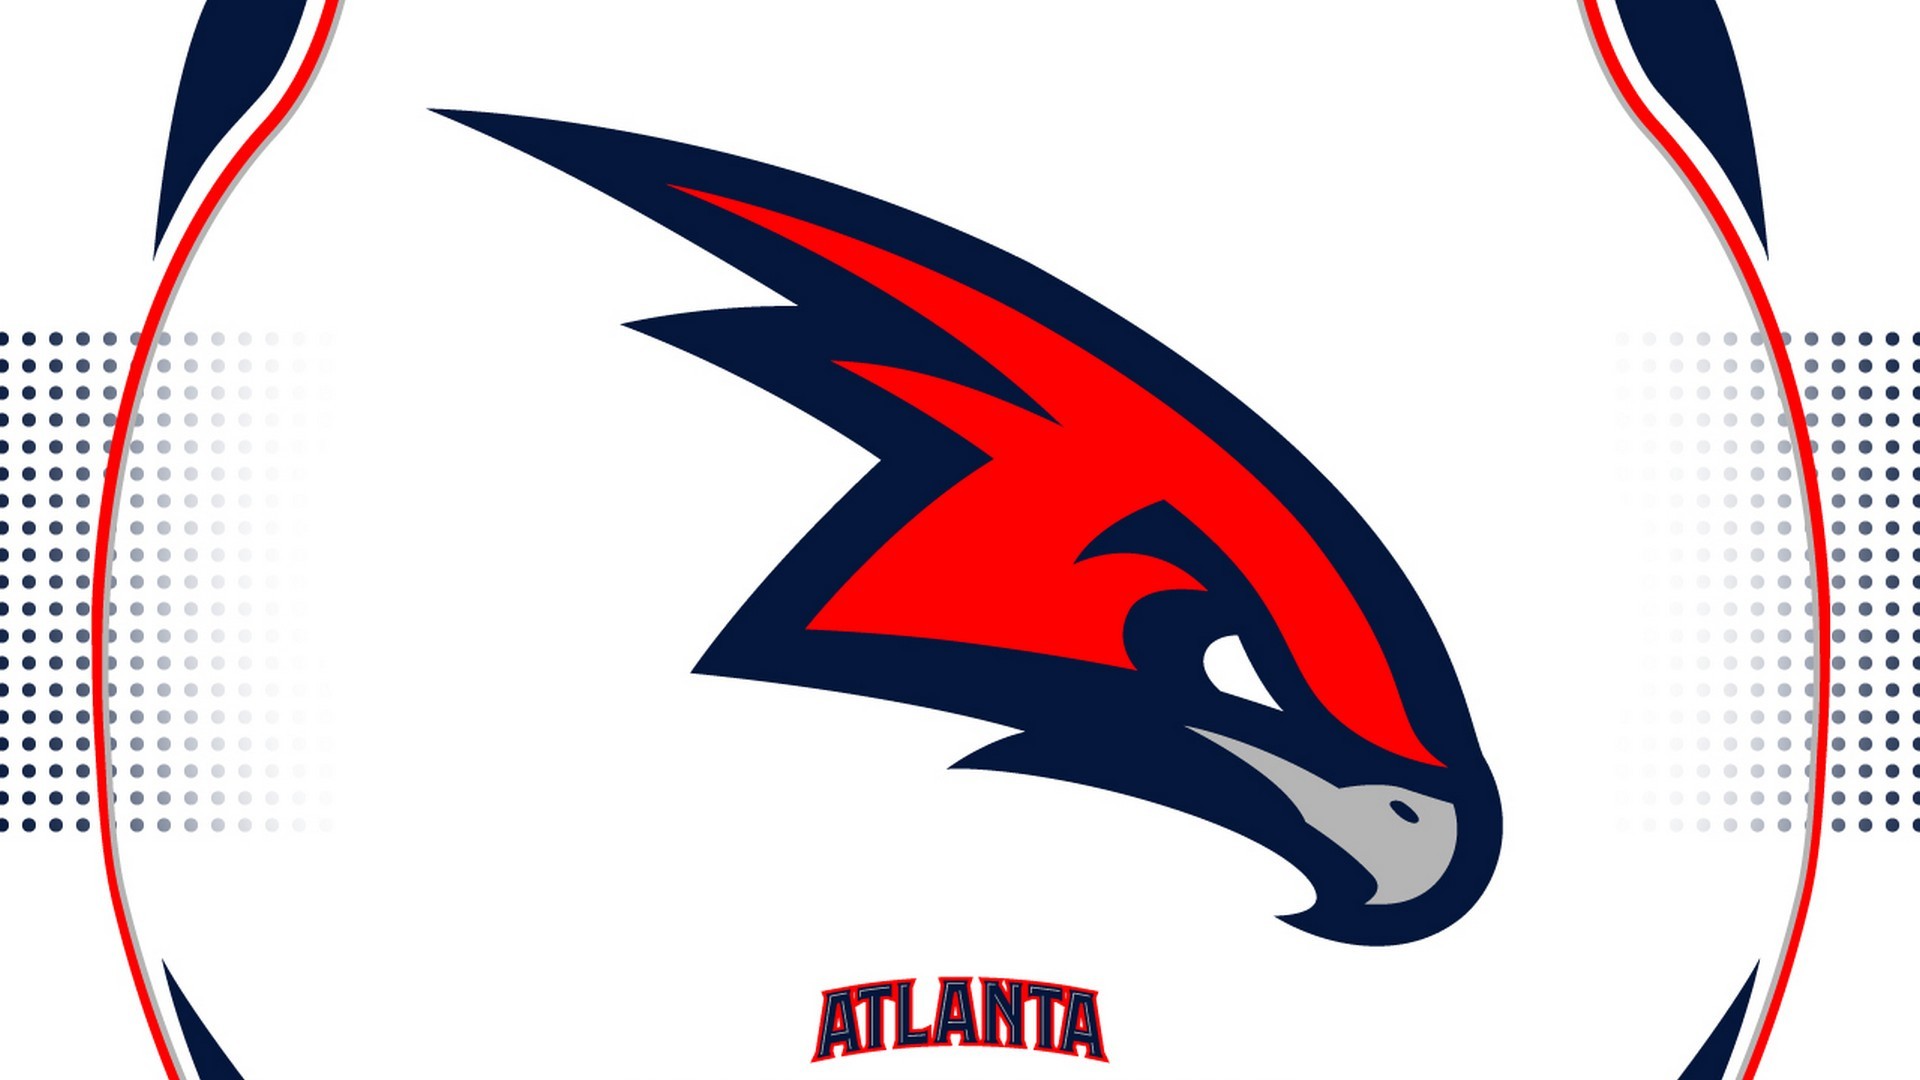 1920x1080 Windows Wallpaper Atlanta Hawks with image dimensions  pixel. You  can make this wallpaper for